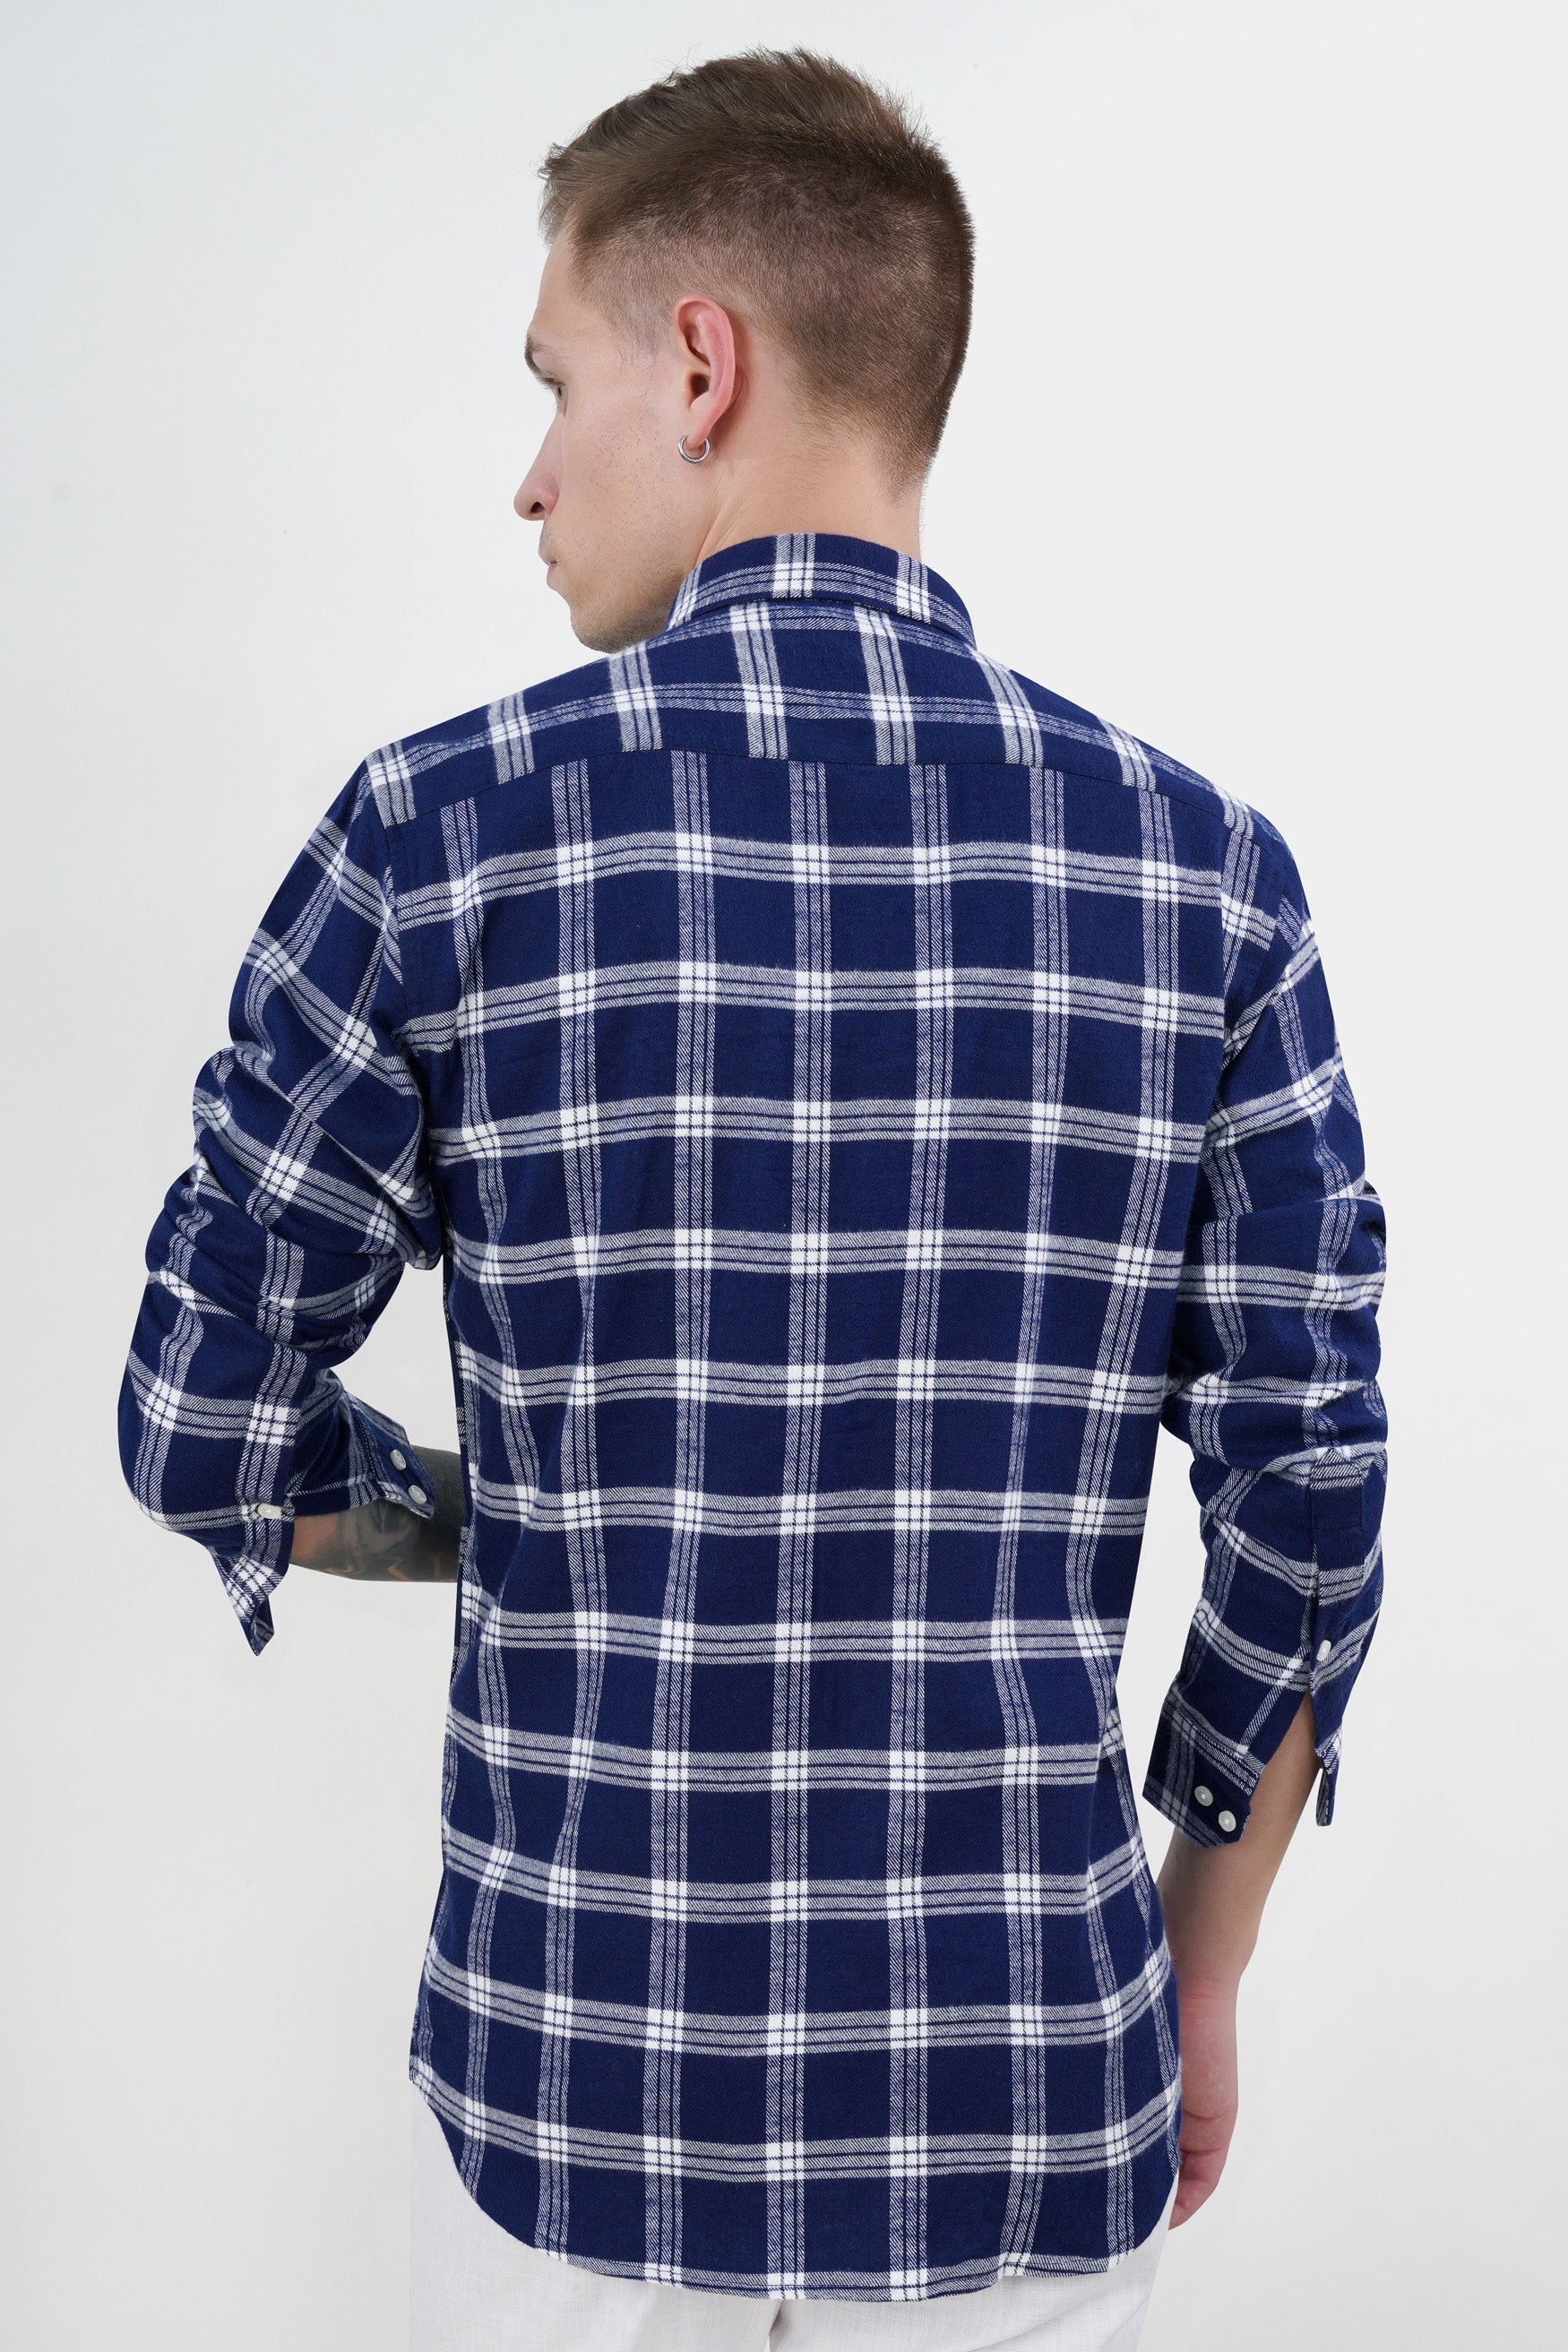 Stratos Blue and White Plaid Flannel Overshirt 11691-FP-38, 11691-FP-H-38, 11691-FP-39, 11691-FP-H-39, 11691-FP-40, 11691-FP-H-40, 11691-FP-42, 11691-FP-H-42, 11691-FP-44, 11691-FP-H-44, 11691-FP-46, 11691-FP-H-46, 11691-FP-48, 11691-FP-H-48, 11691-FP-50, 11691-FP-H-50, 11691-FP-52, 11691-FP-H-52